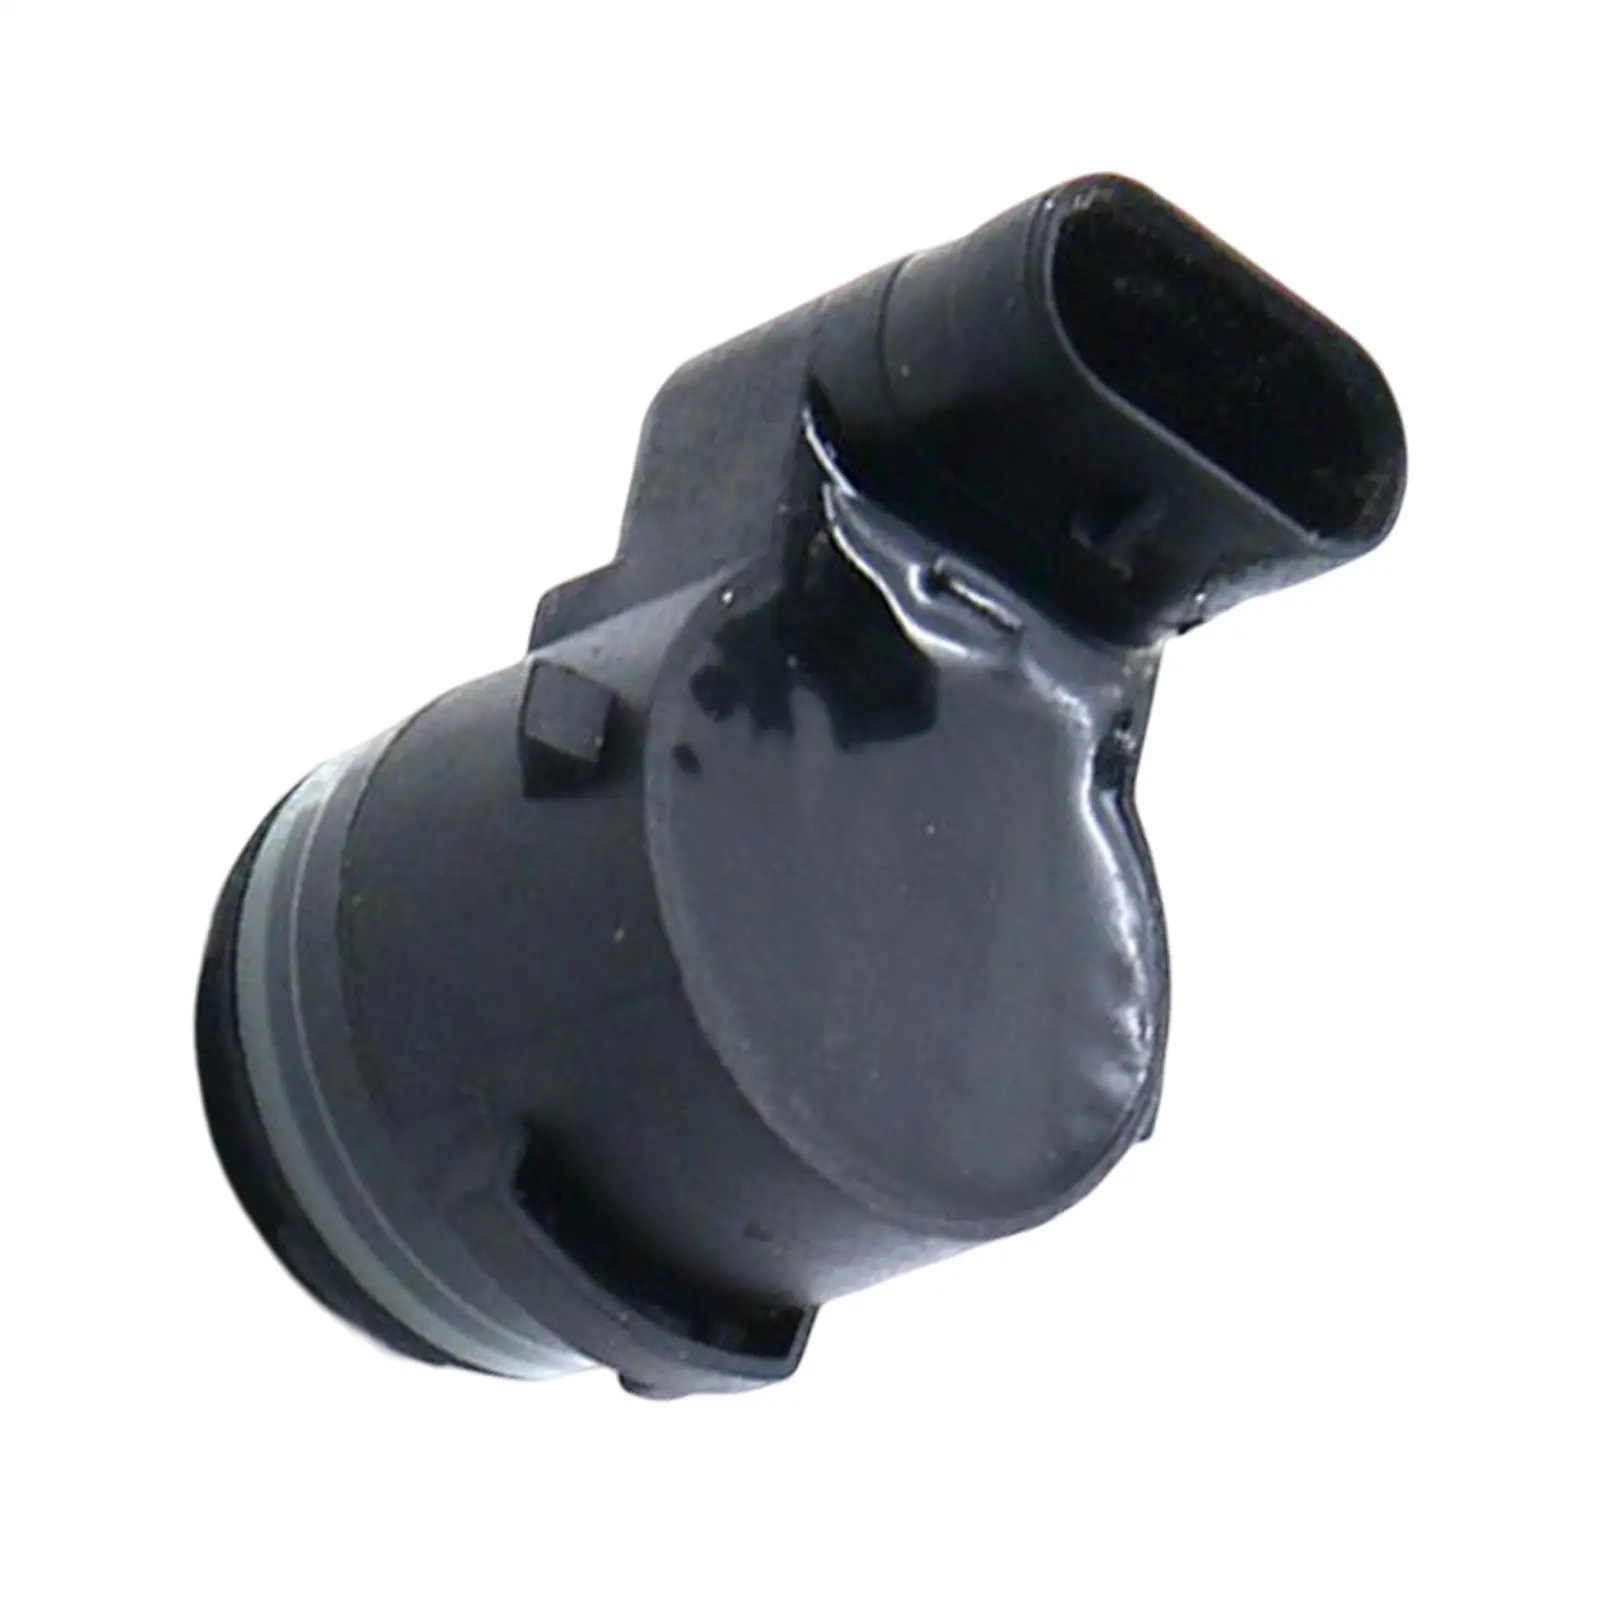 Parking Assist Sensor Replacements for Tesla Model 3 S x Y 16-21 Good Performance Automotive Accessories Easily Install